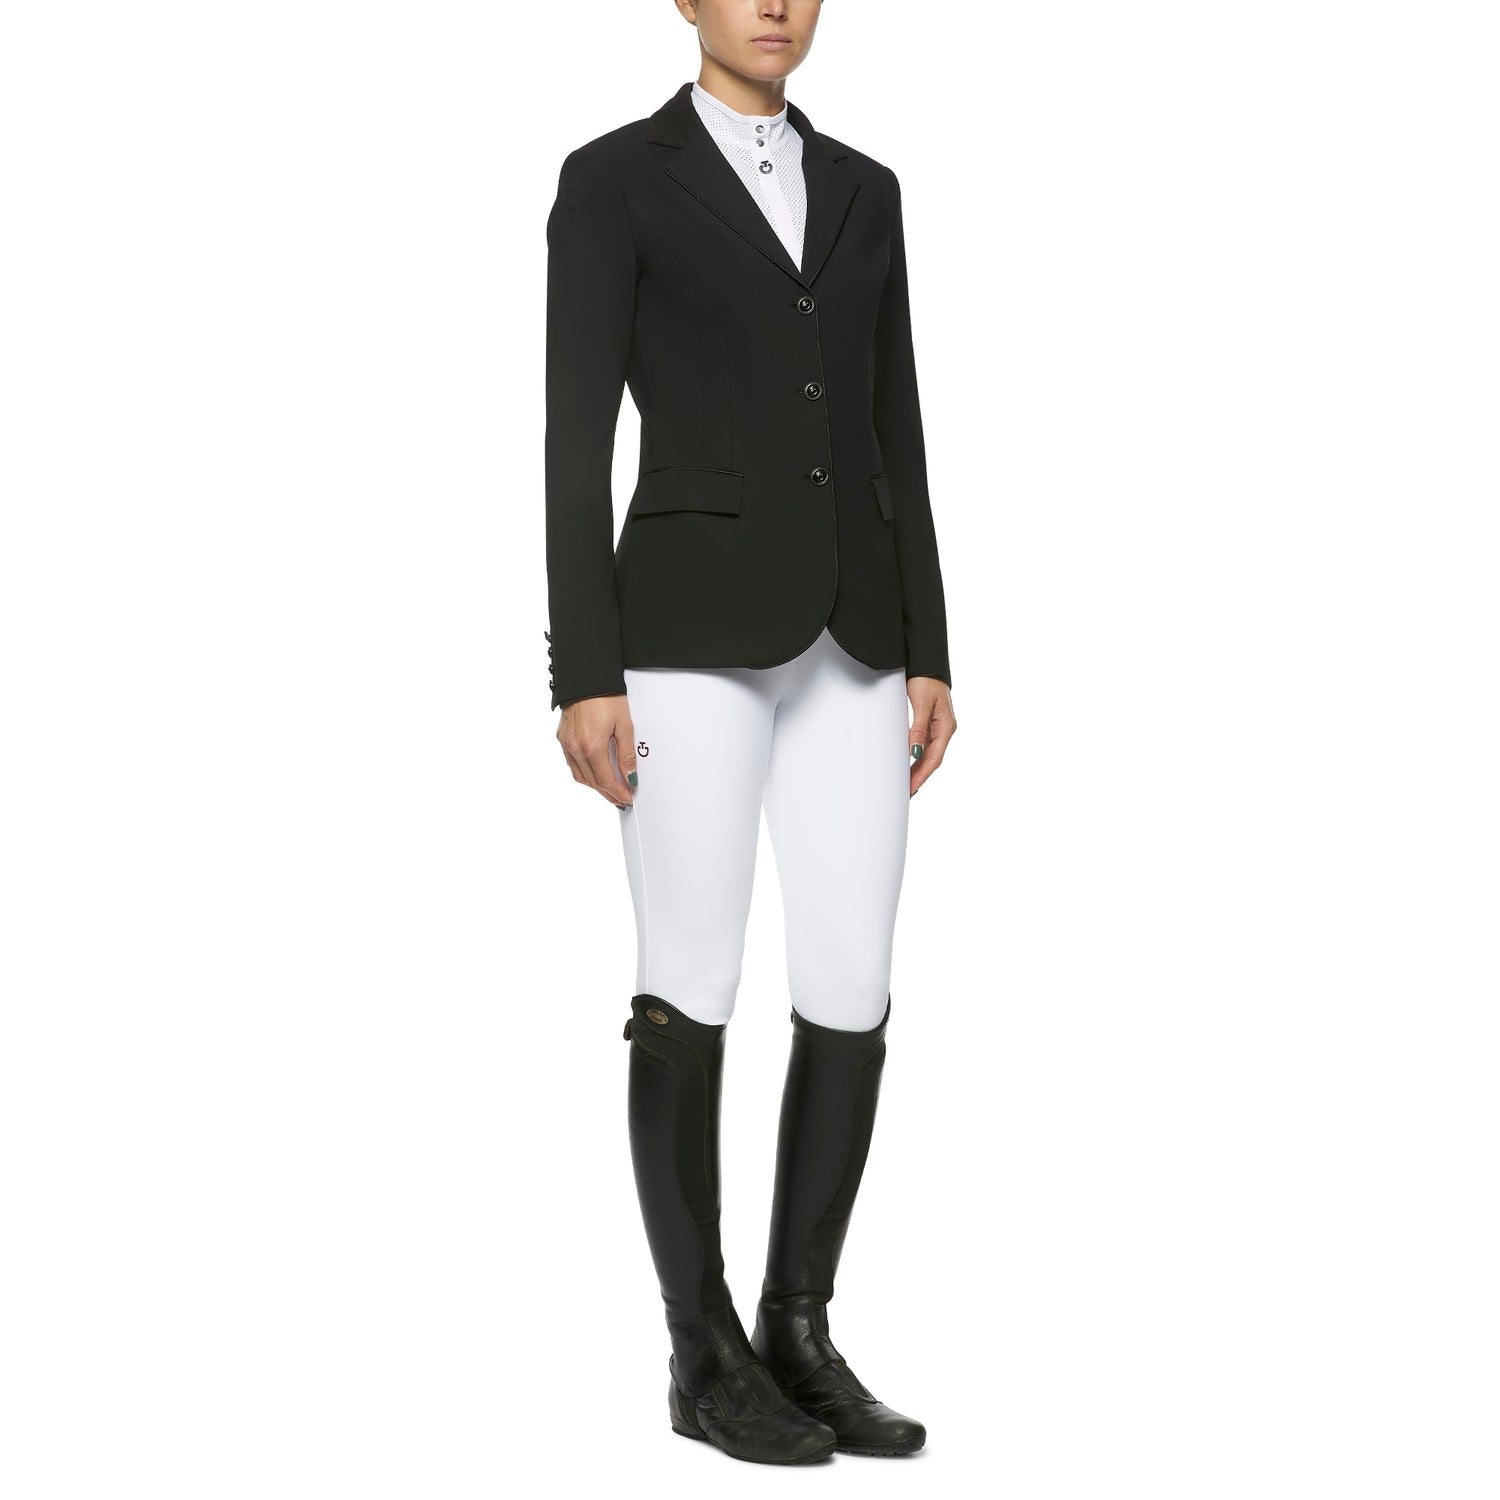 The Cavalleria Toscana GP Riding Jacket competition jacket never goes out of style and exudes typical CT sophistication and quality.  The tailoring is in a class of its own allowing for an extremely flattering fit whilst giving maximum movement when riding. The luxury soft stretchy jersey is comfortable, easy to care for and doesn&